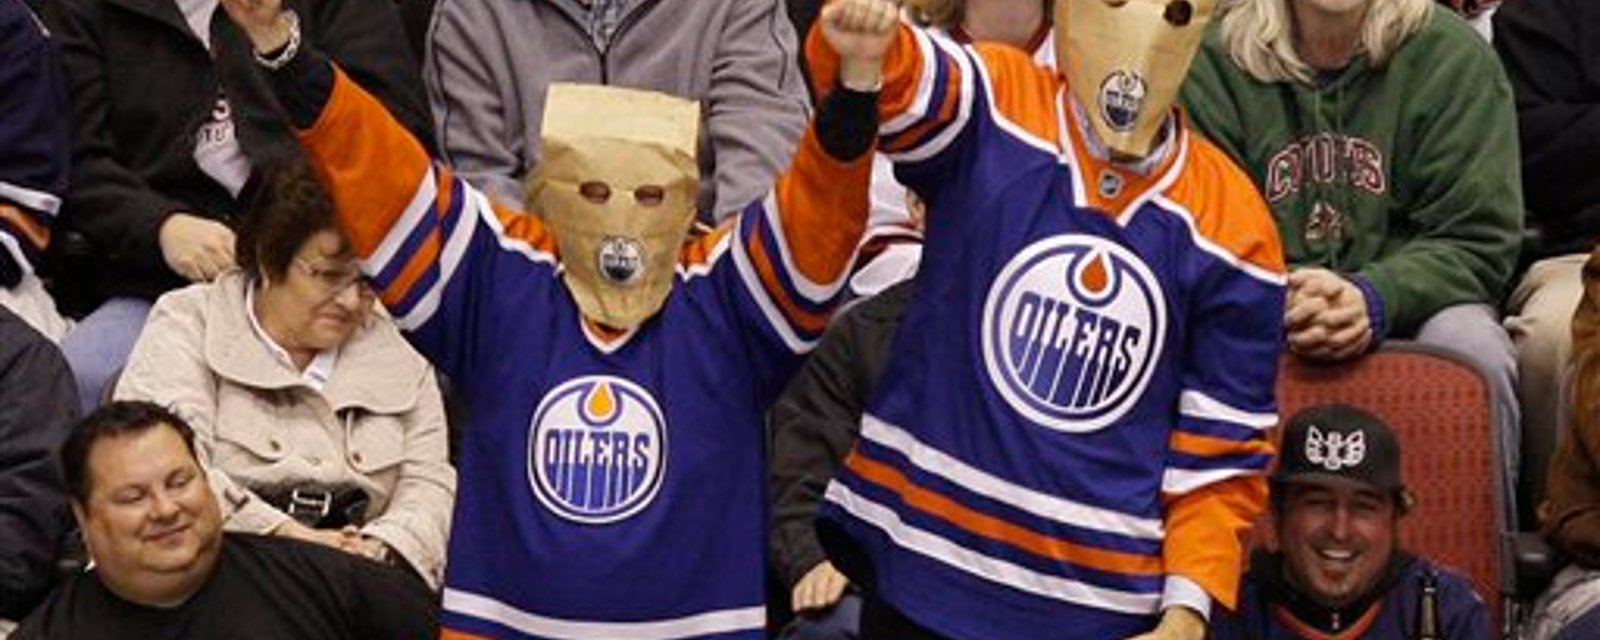 Oilers fans are fed up, claim they're 'getting taken advantage of'